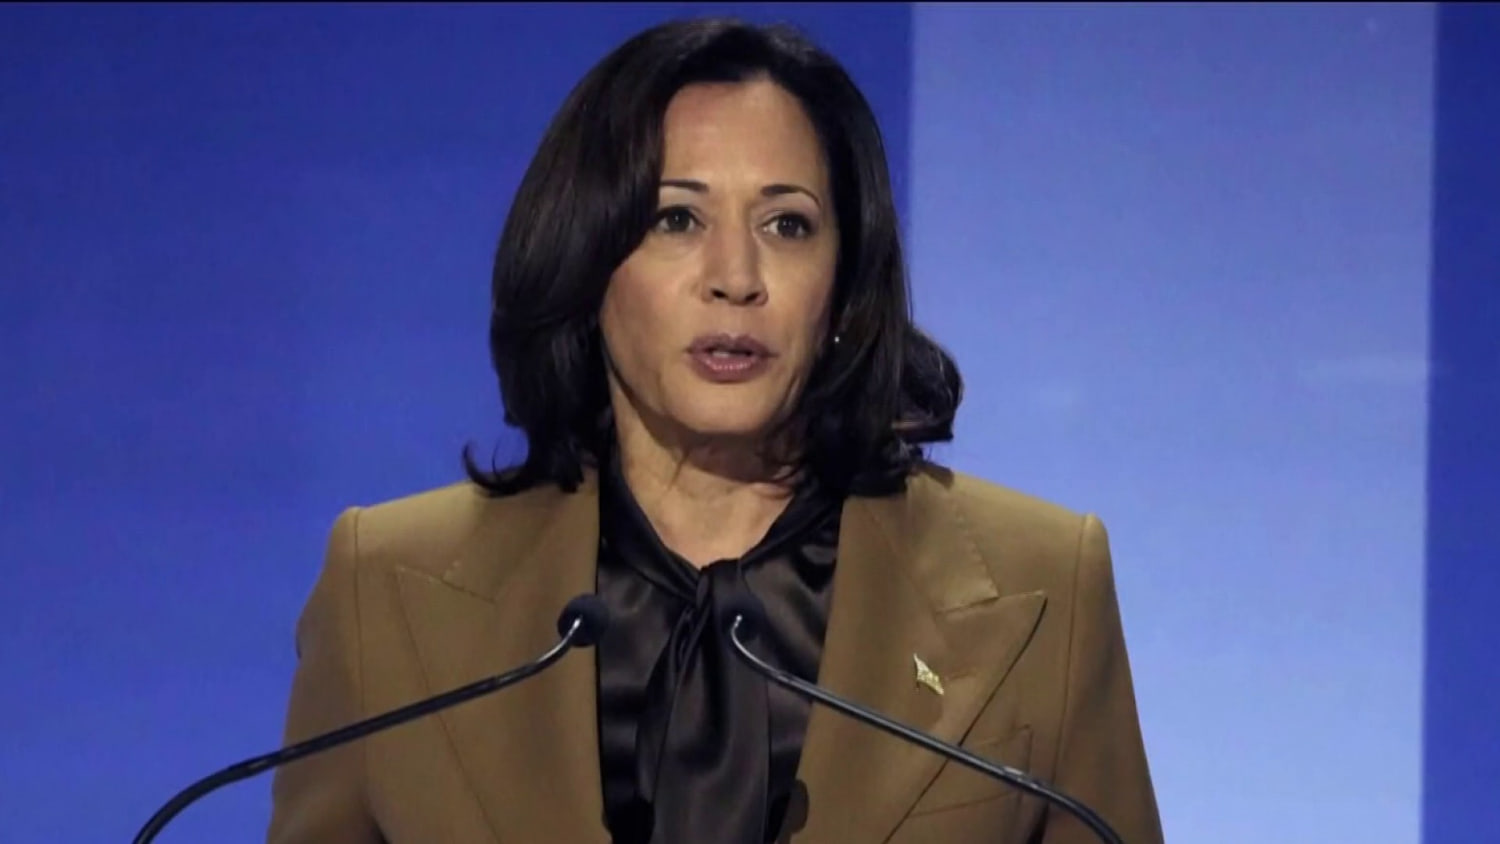 Harris to speak on reproductive rights in Arizona after abortion ruling